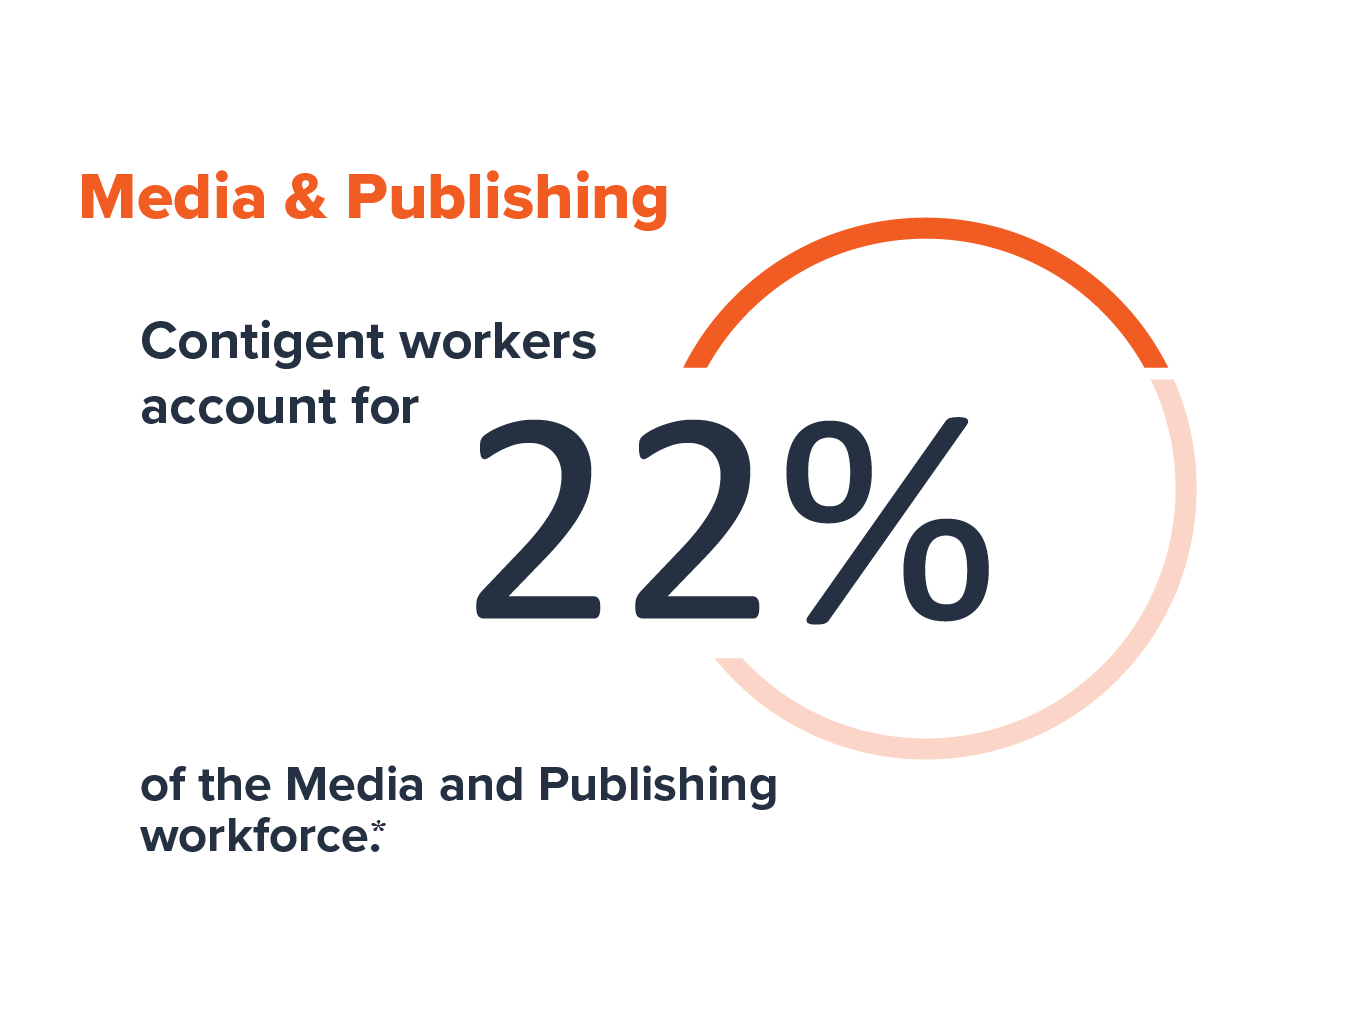 Challenges in the Media and Publishing Industry